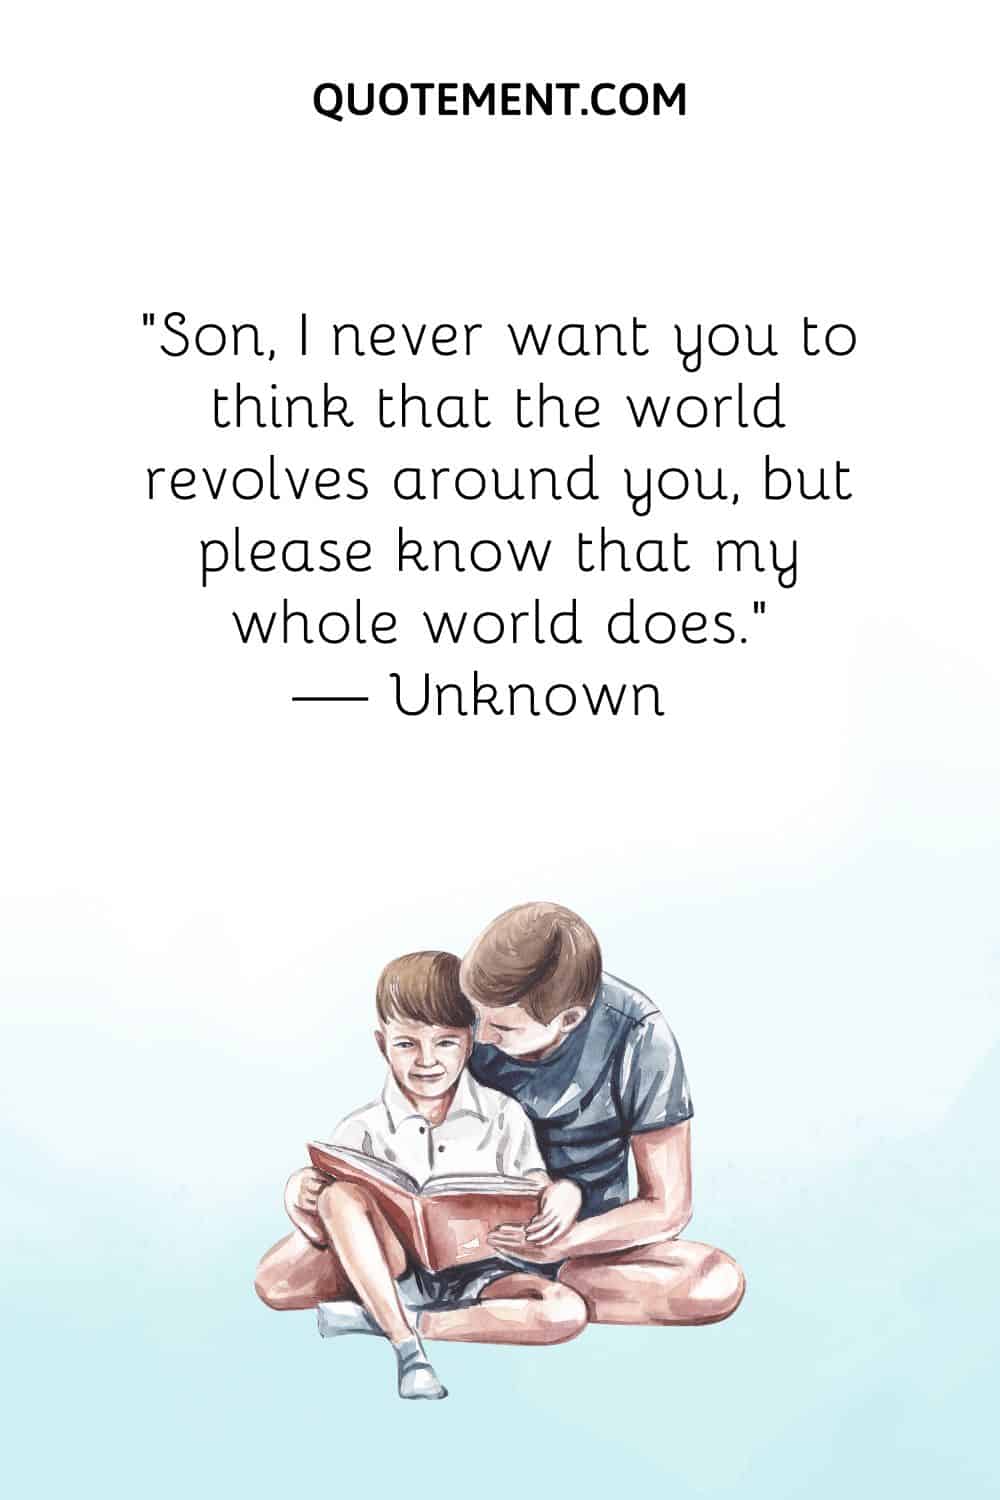 Son, I never want you to think that the world revolves around you, but please know that my whole world does